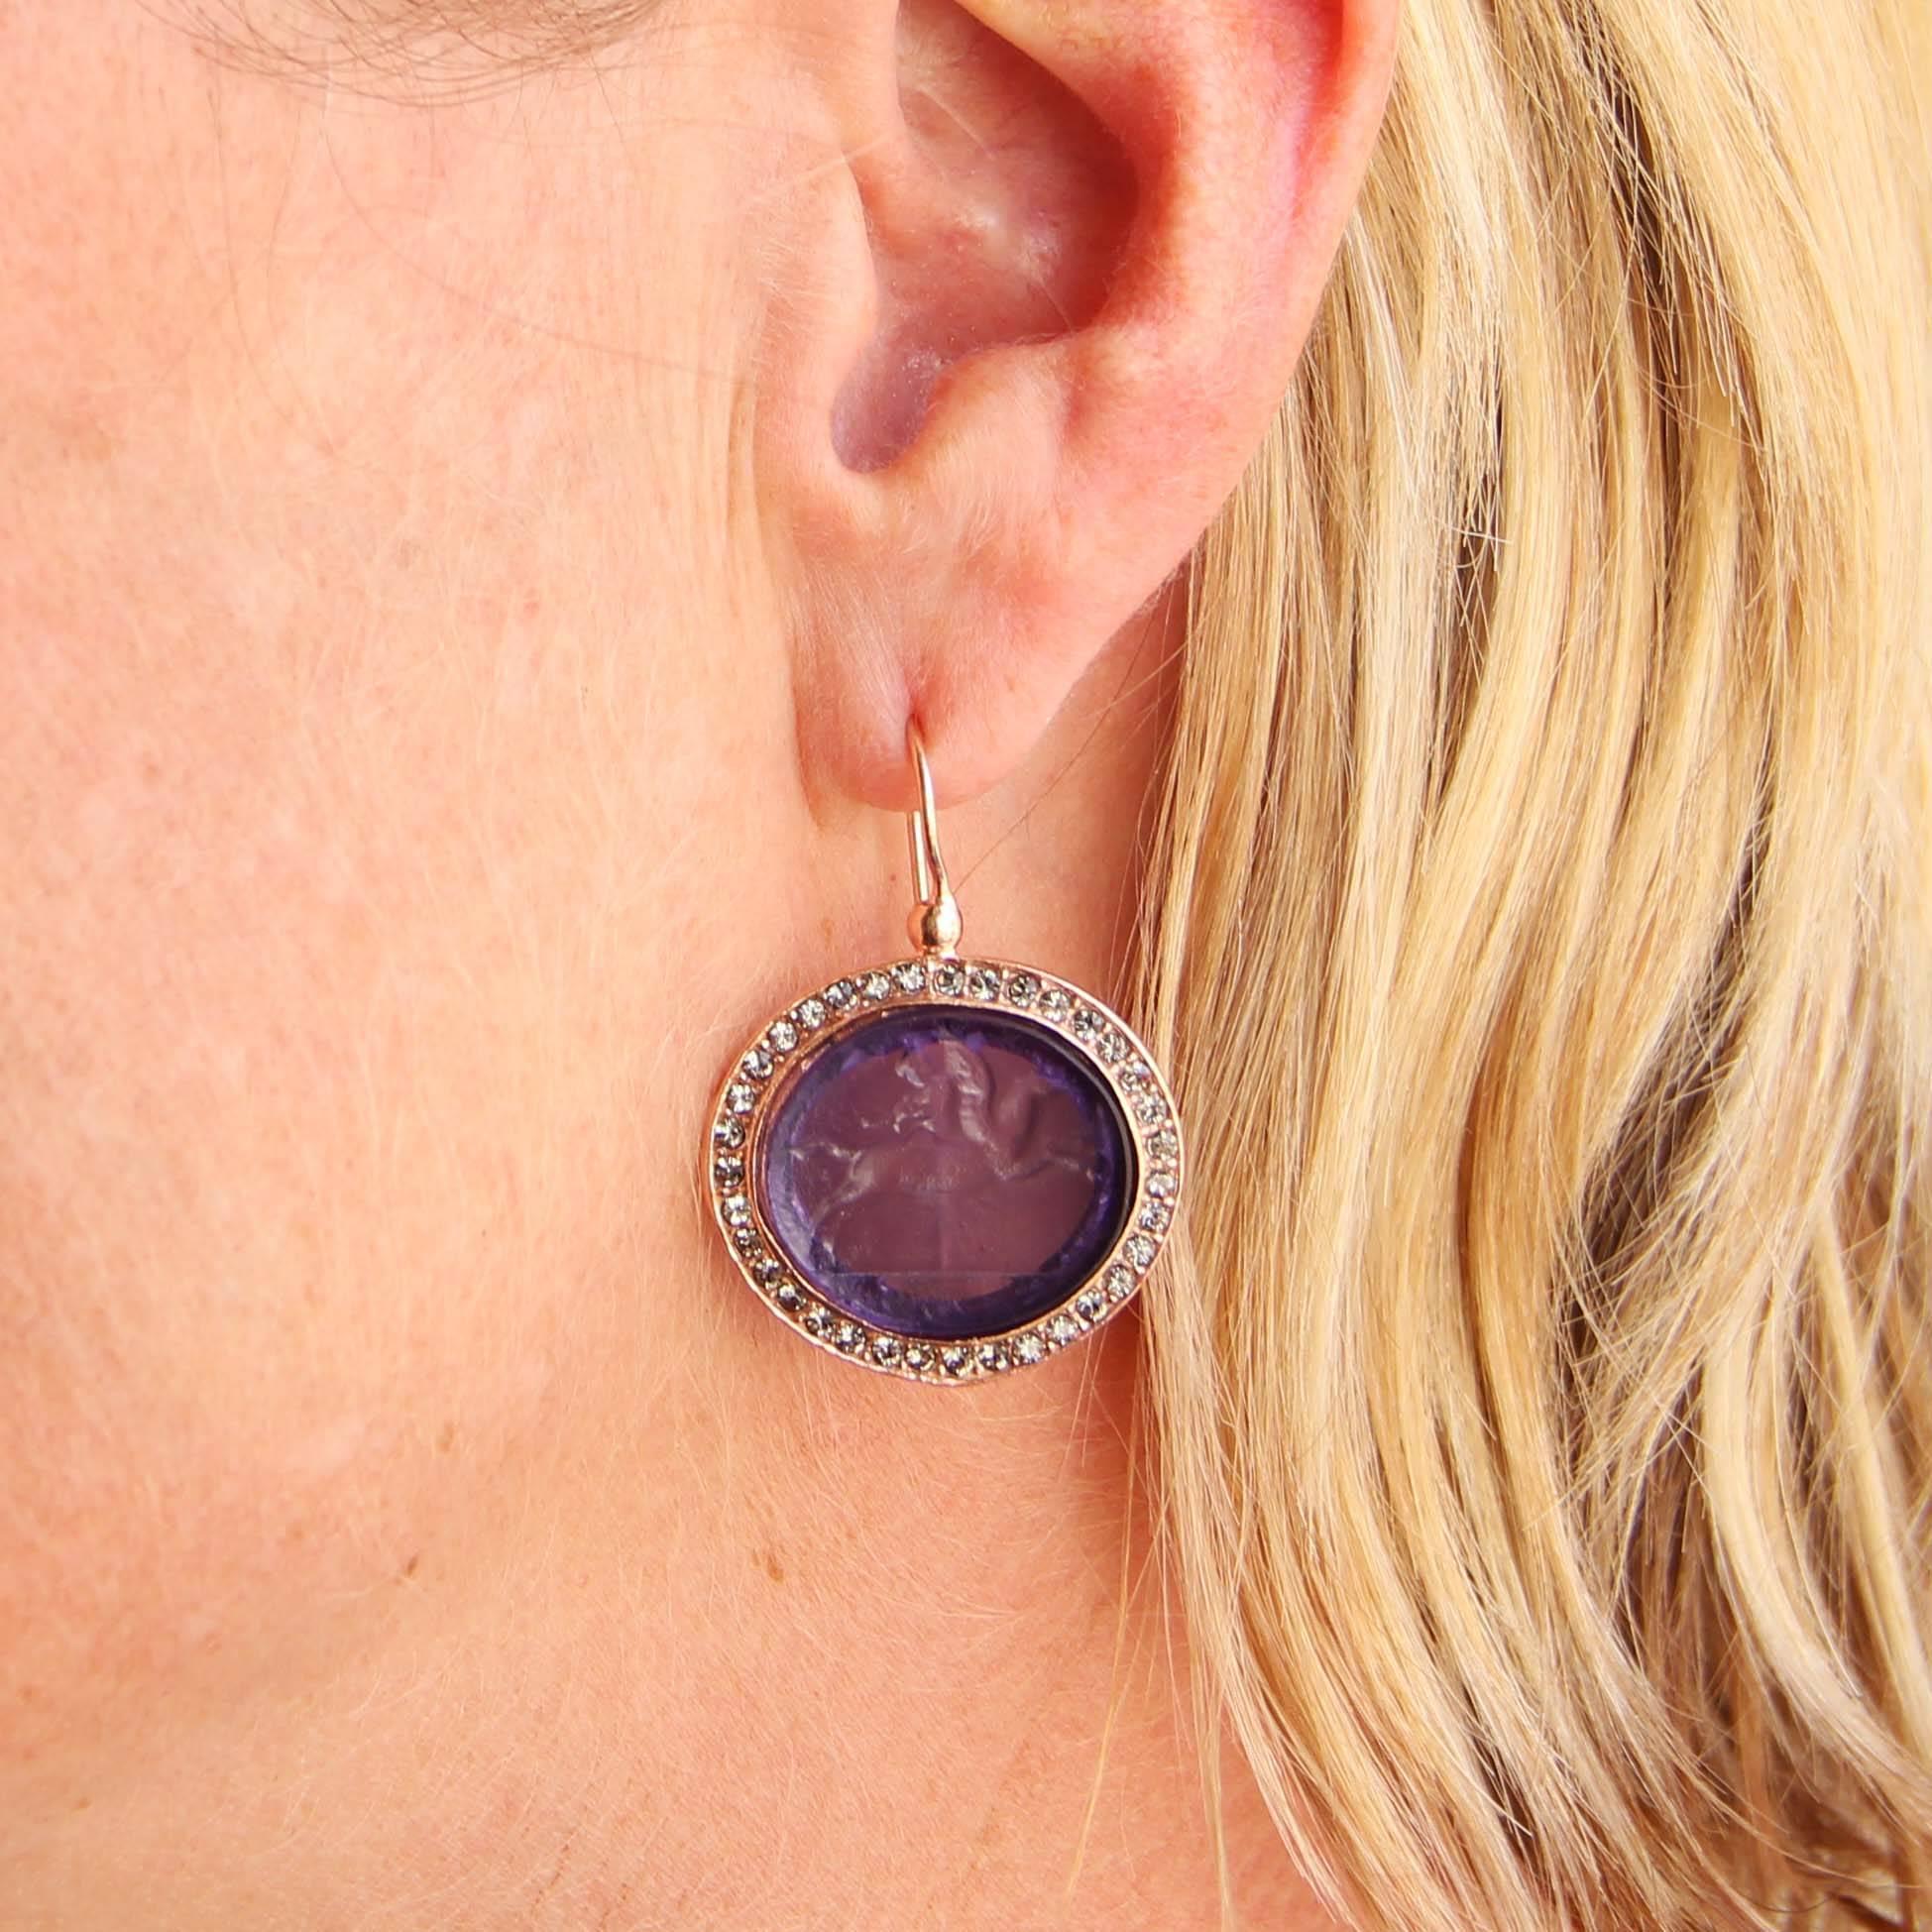 For pierced ears.

Pair of earrings in vermeil, silver and rose gold.

Drop earrings are set by a violet cameo on glass paste surrounded by crystals. The clasps are goosenecks with safety hooks. 

Height: 3,6 cm, width at the cameo: 2,5 cm.
Total